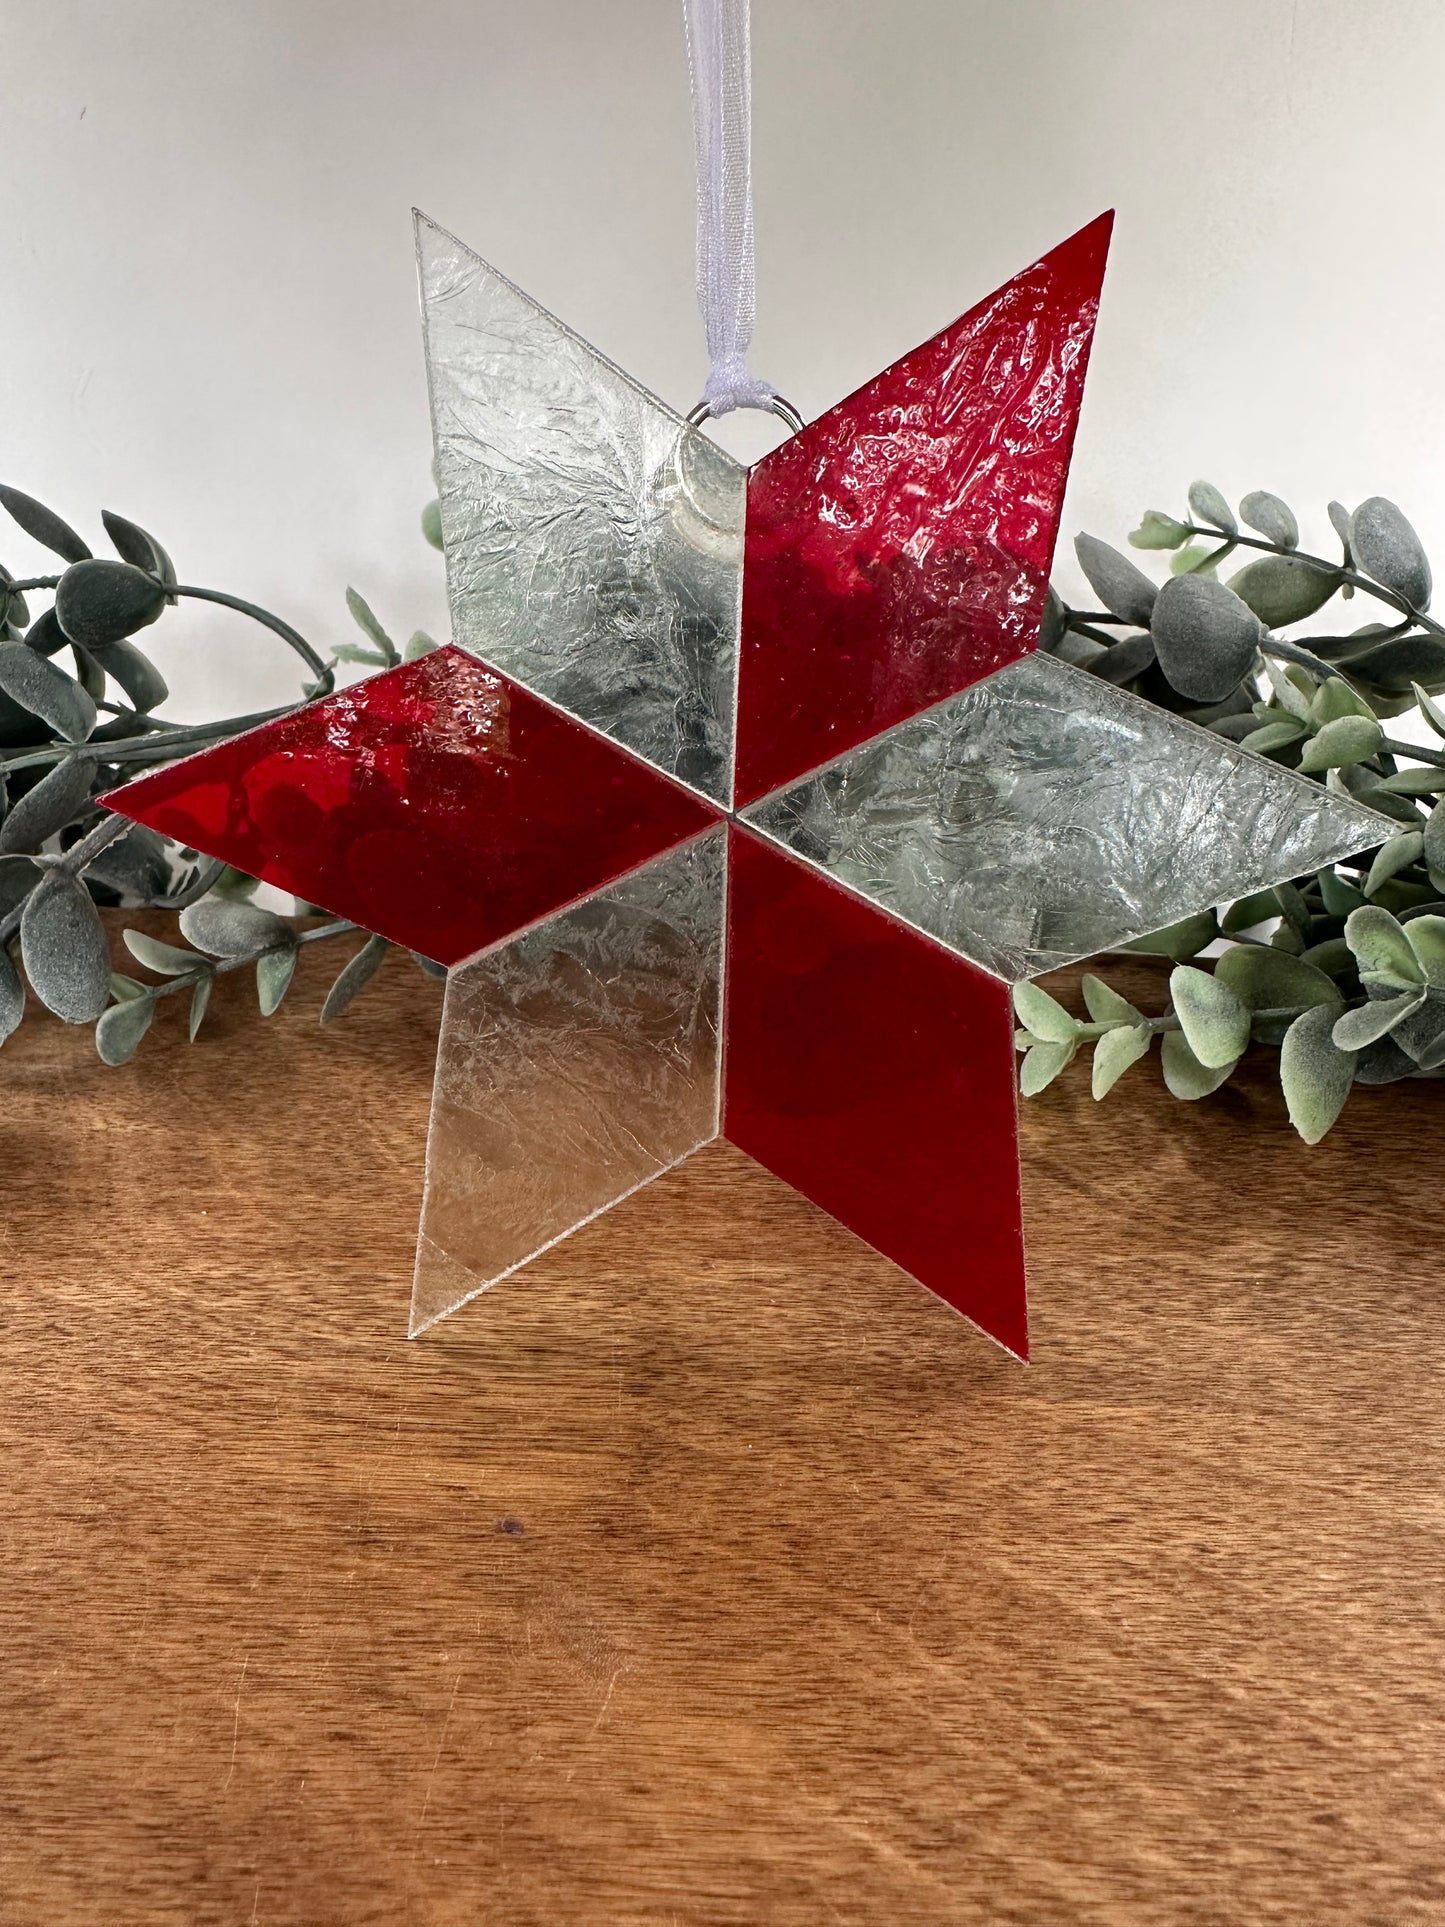 Six-point Star Mosaic Glass Ornament (#1 solid)